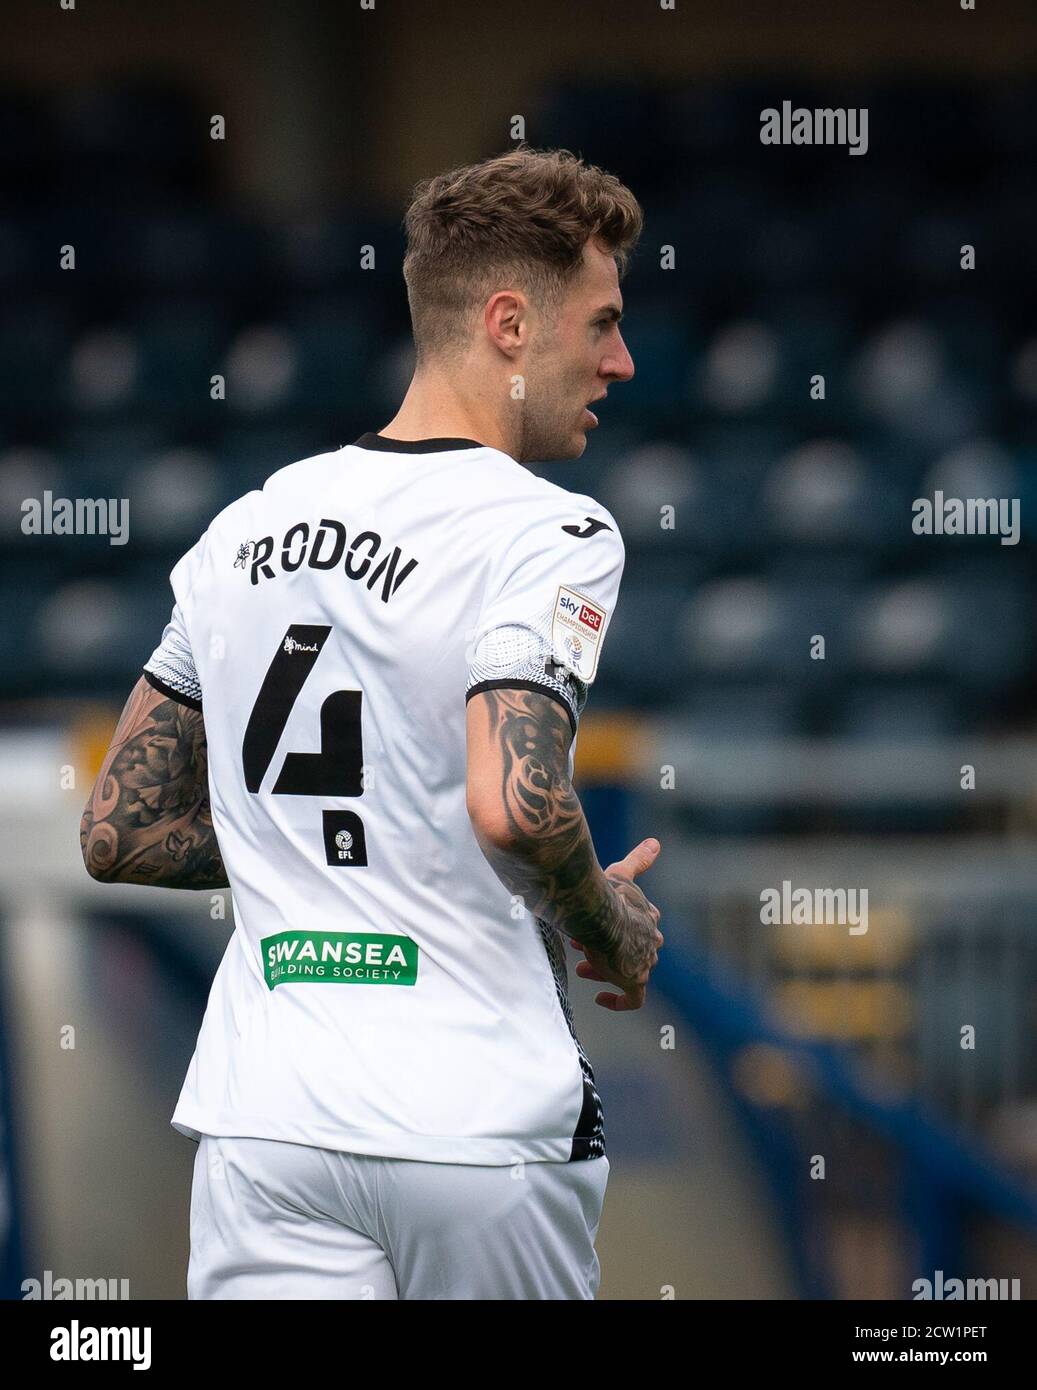 Joe rodon hi-res stock photography and images - Page 4 - Alamy